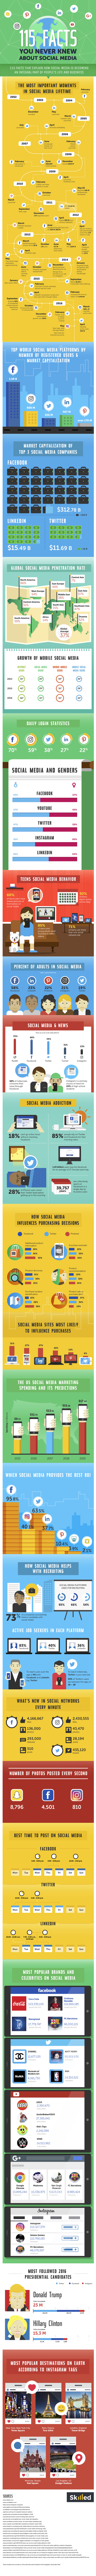 115 Must Know Facts about Social Media [INFOGRAPHIC]